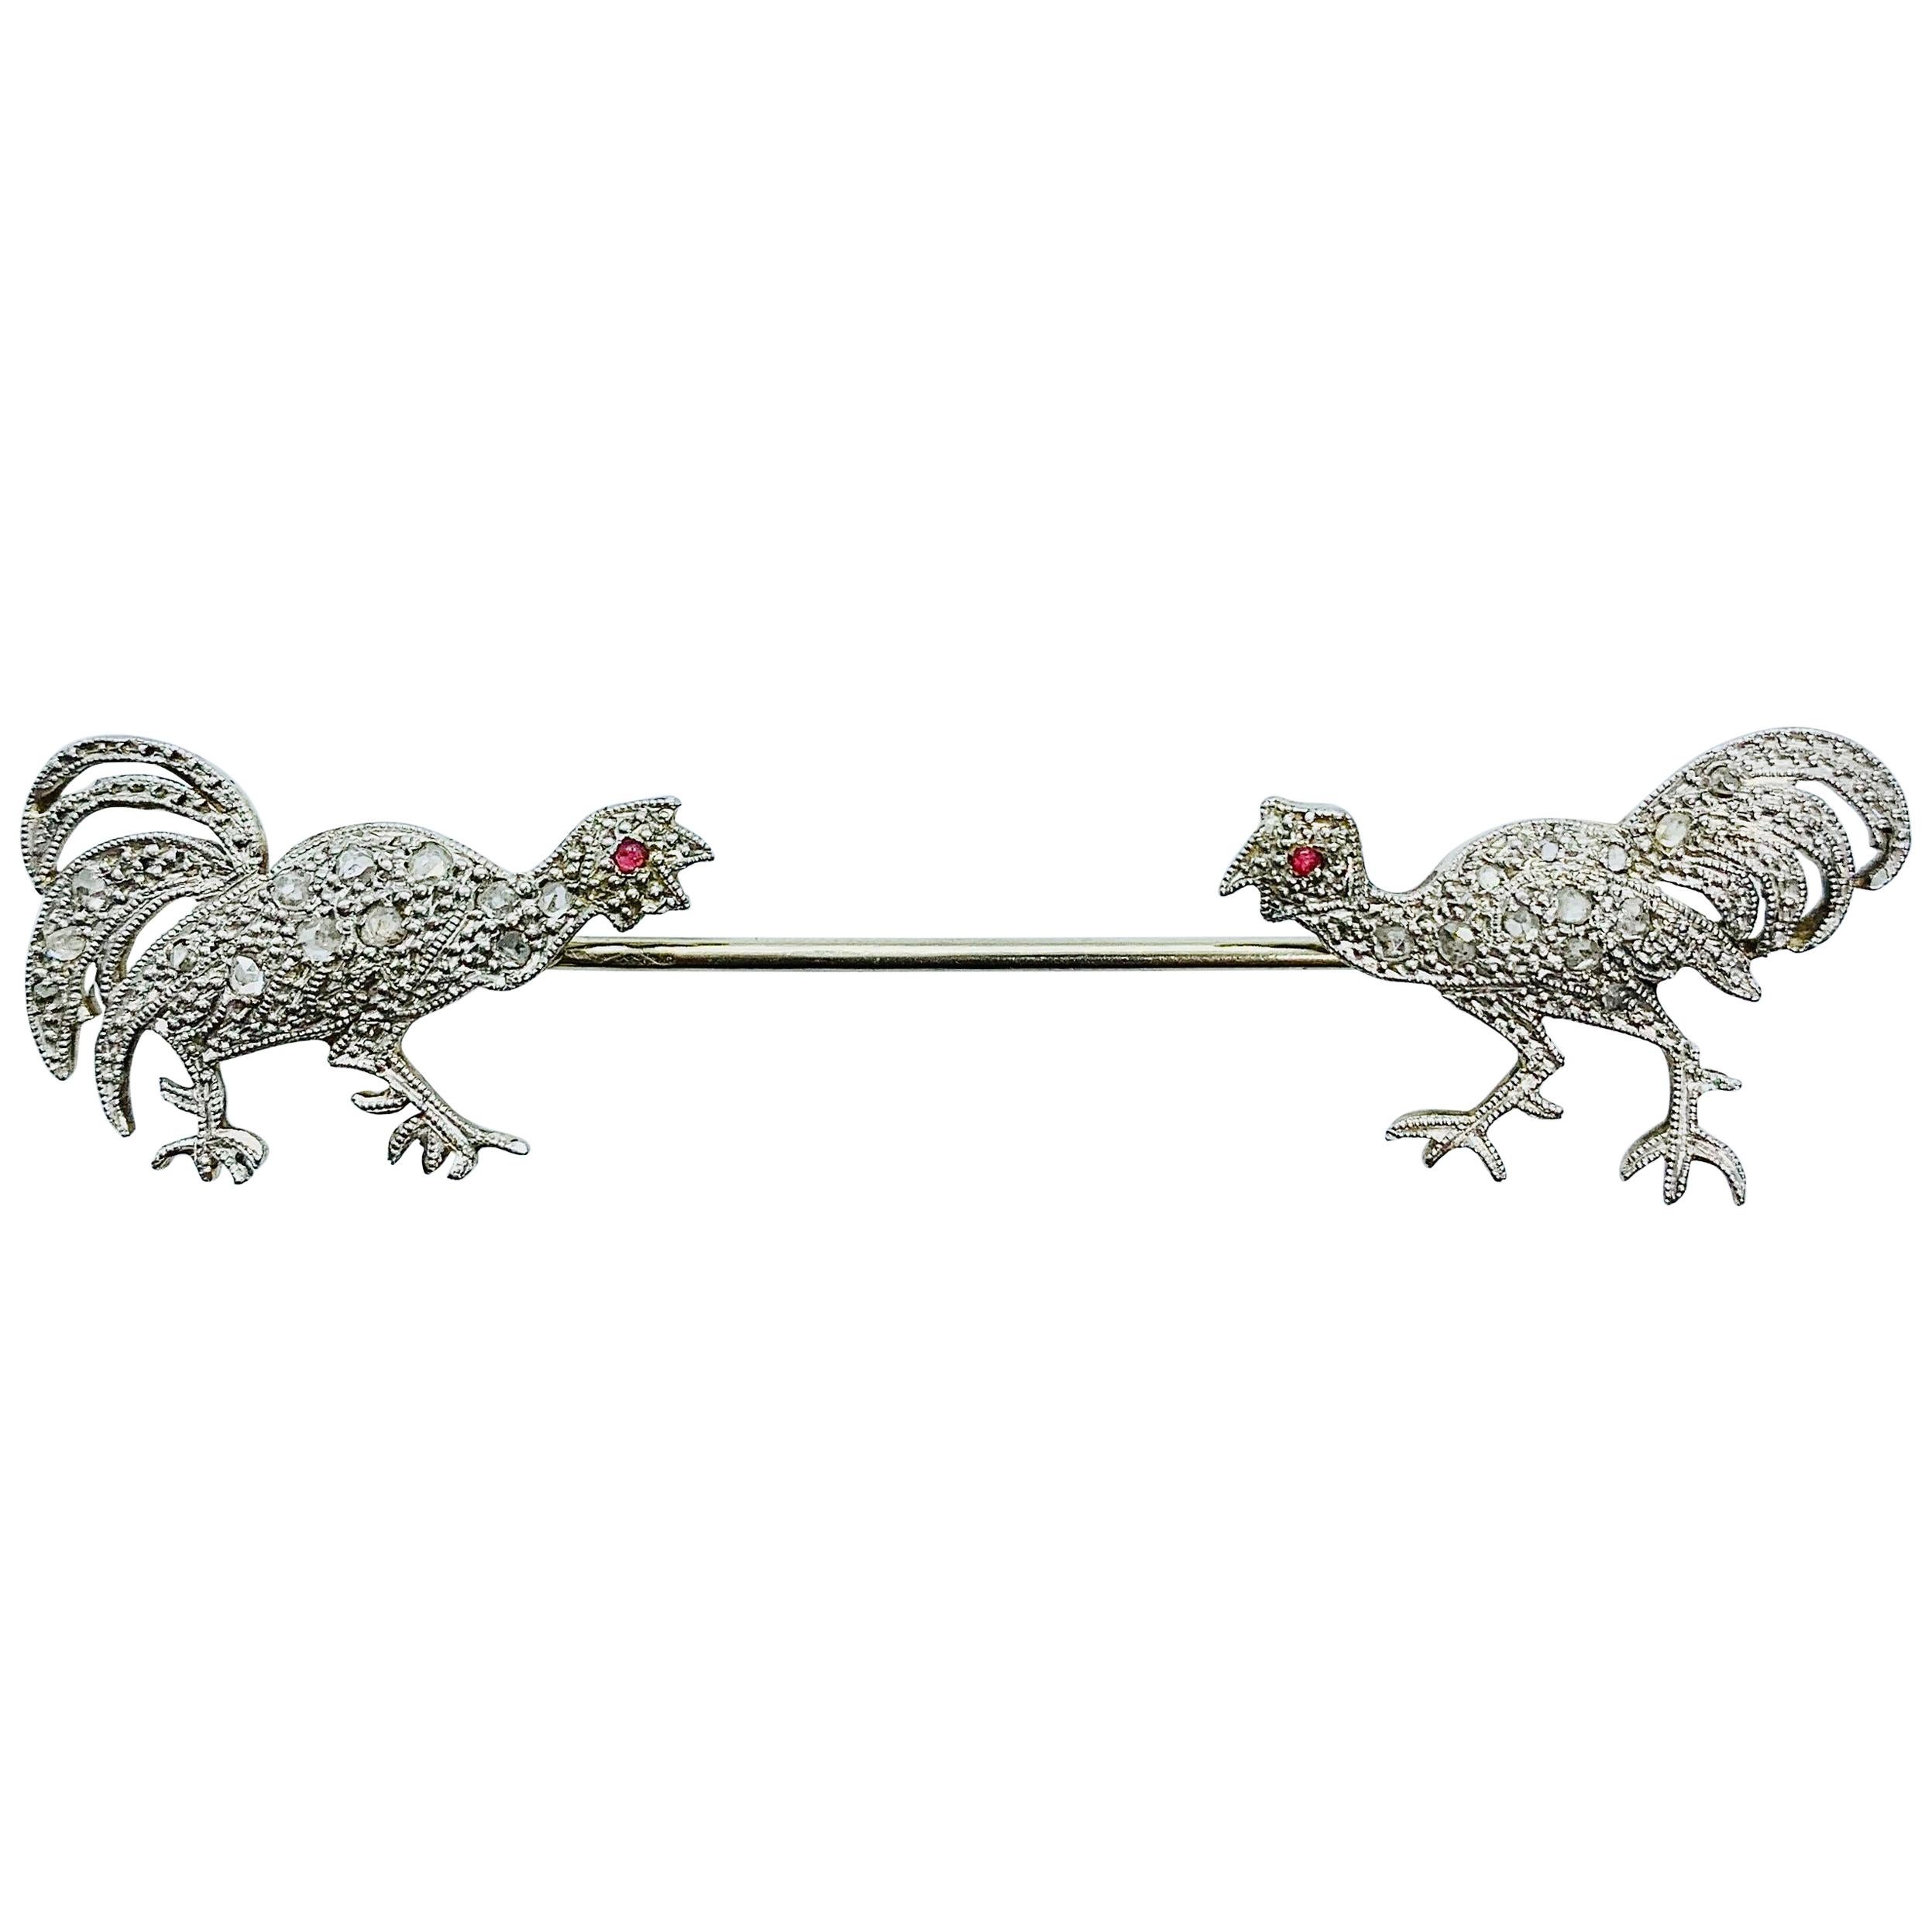 Vintage French 18 Karat White Gold Diamond and Ruby Rooster Jabot Pin